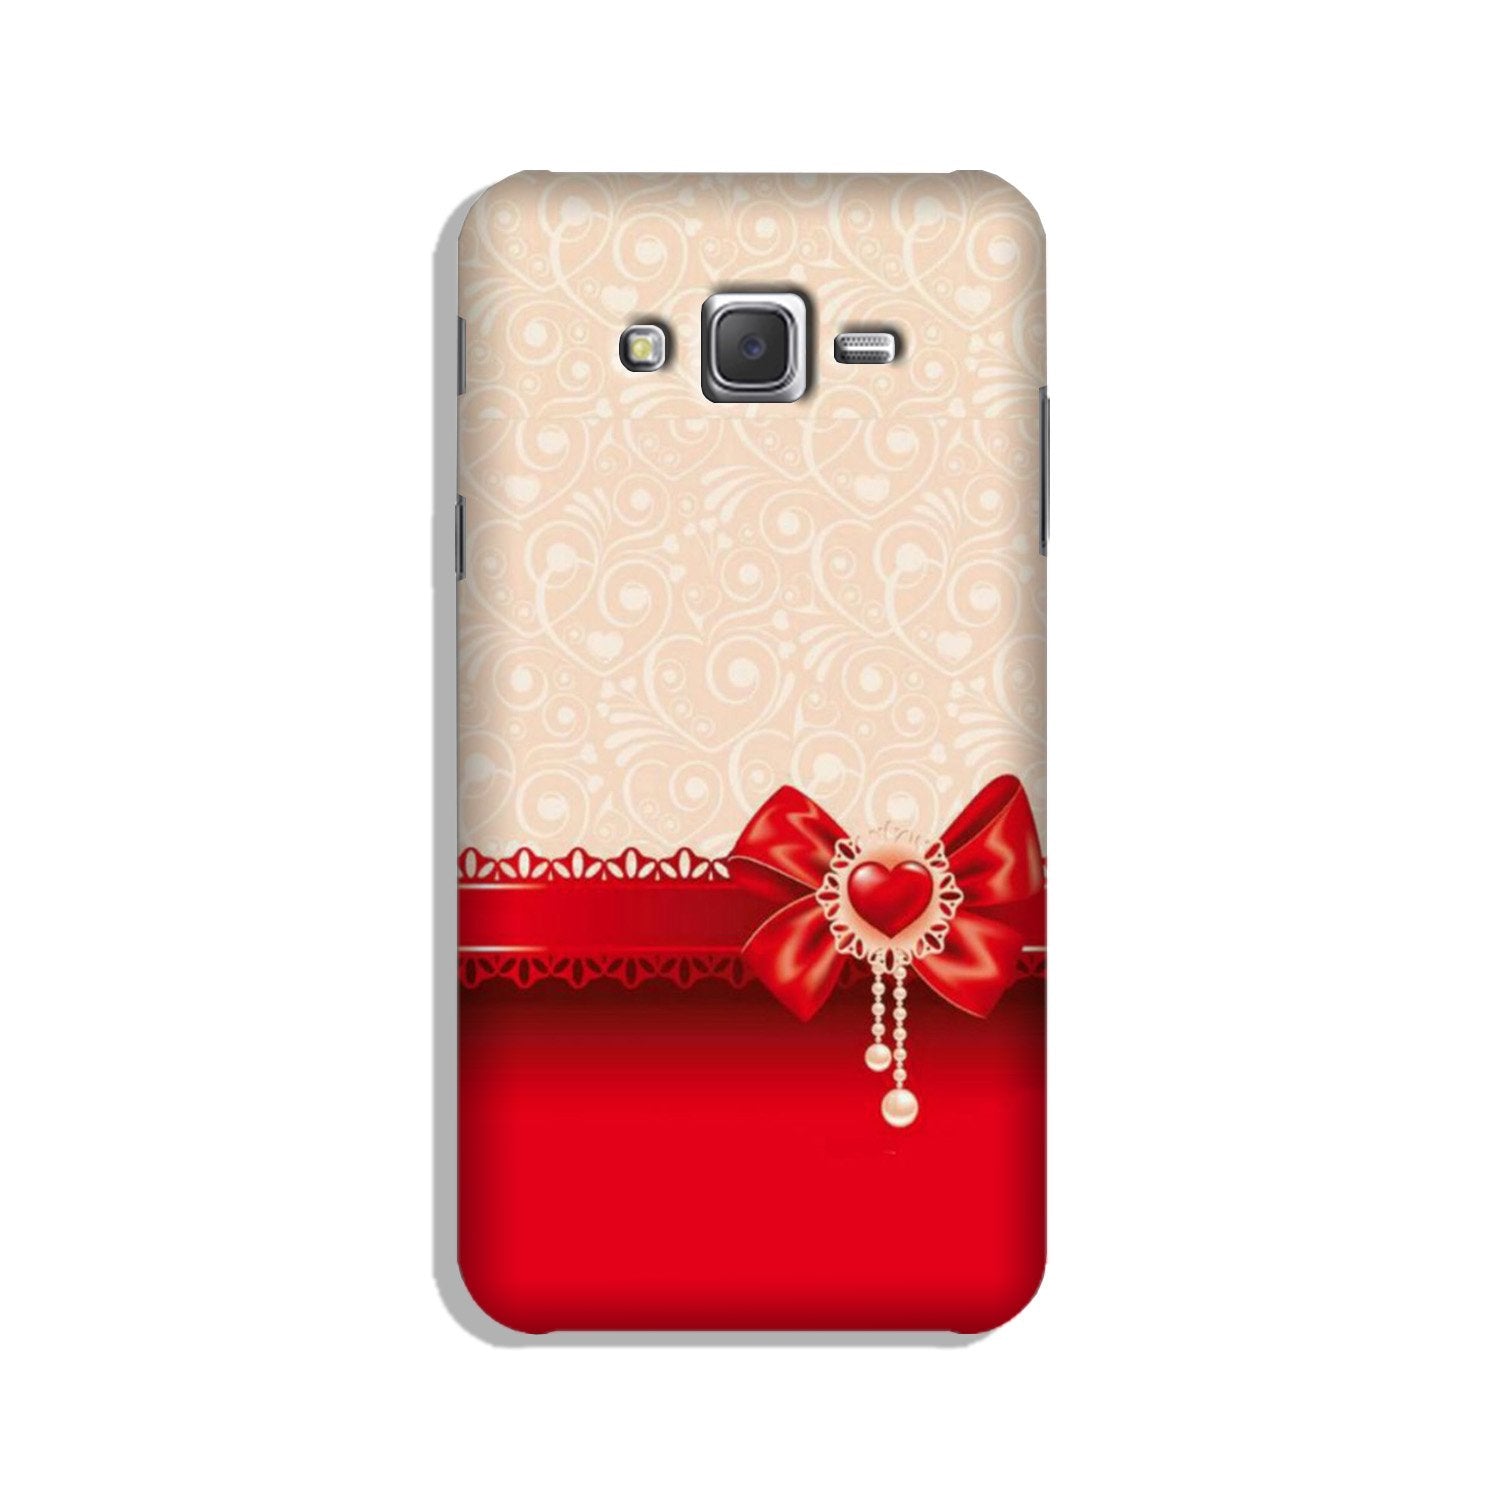 Gift Wrap3 Case for Galaxy J3 (2015)